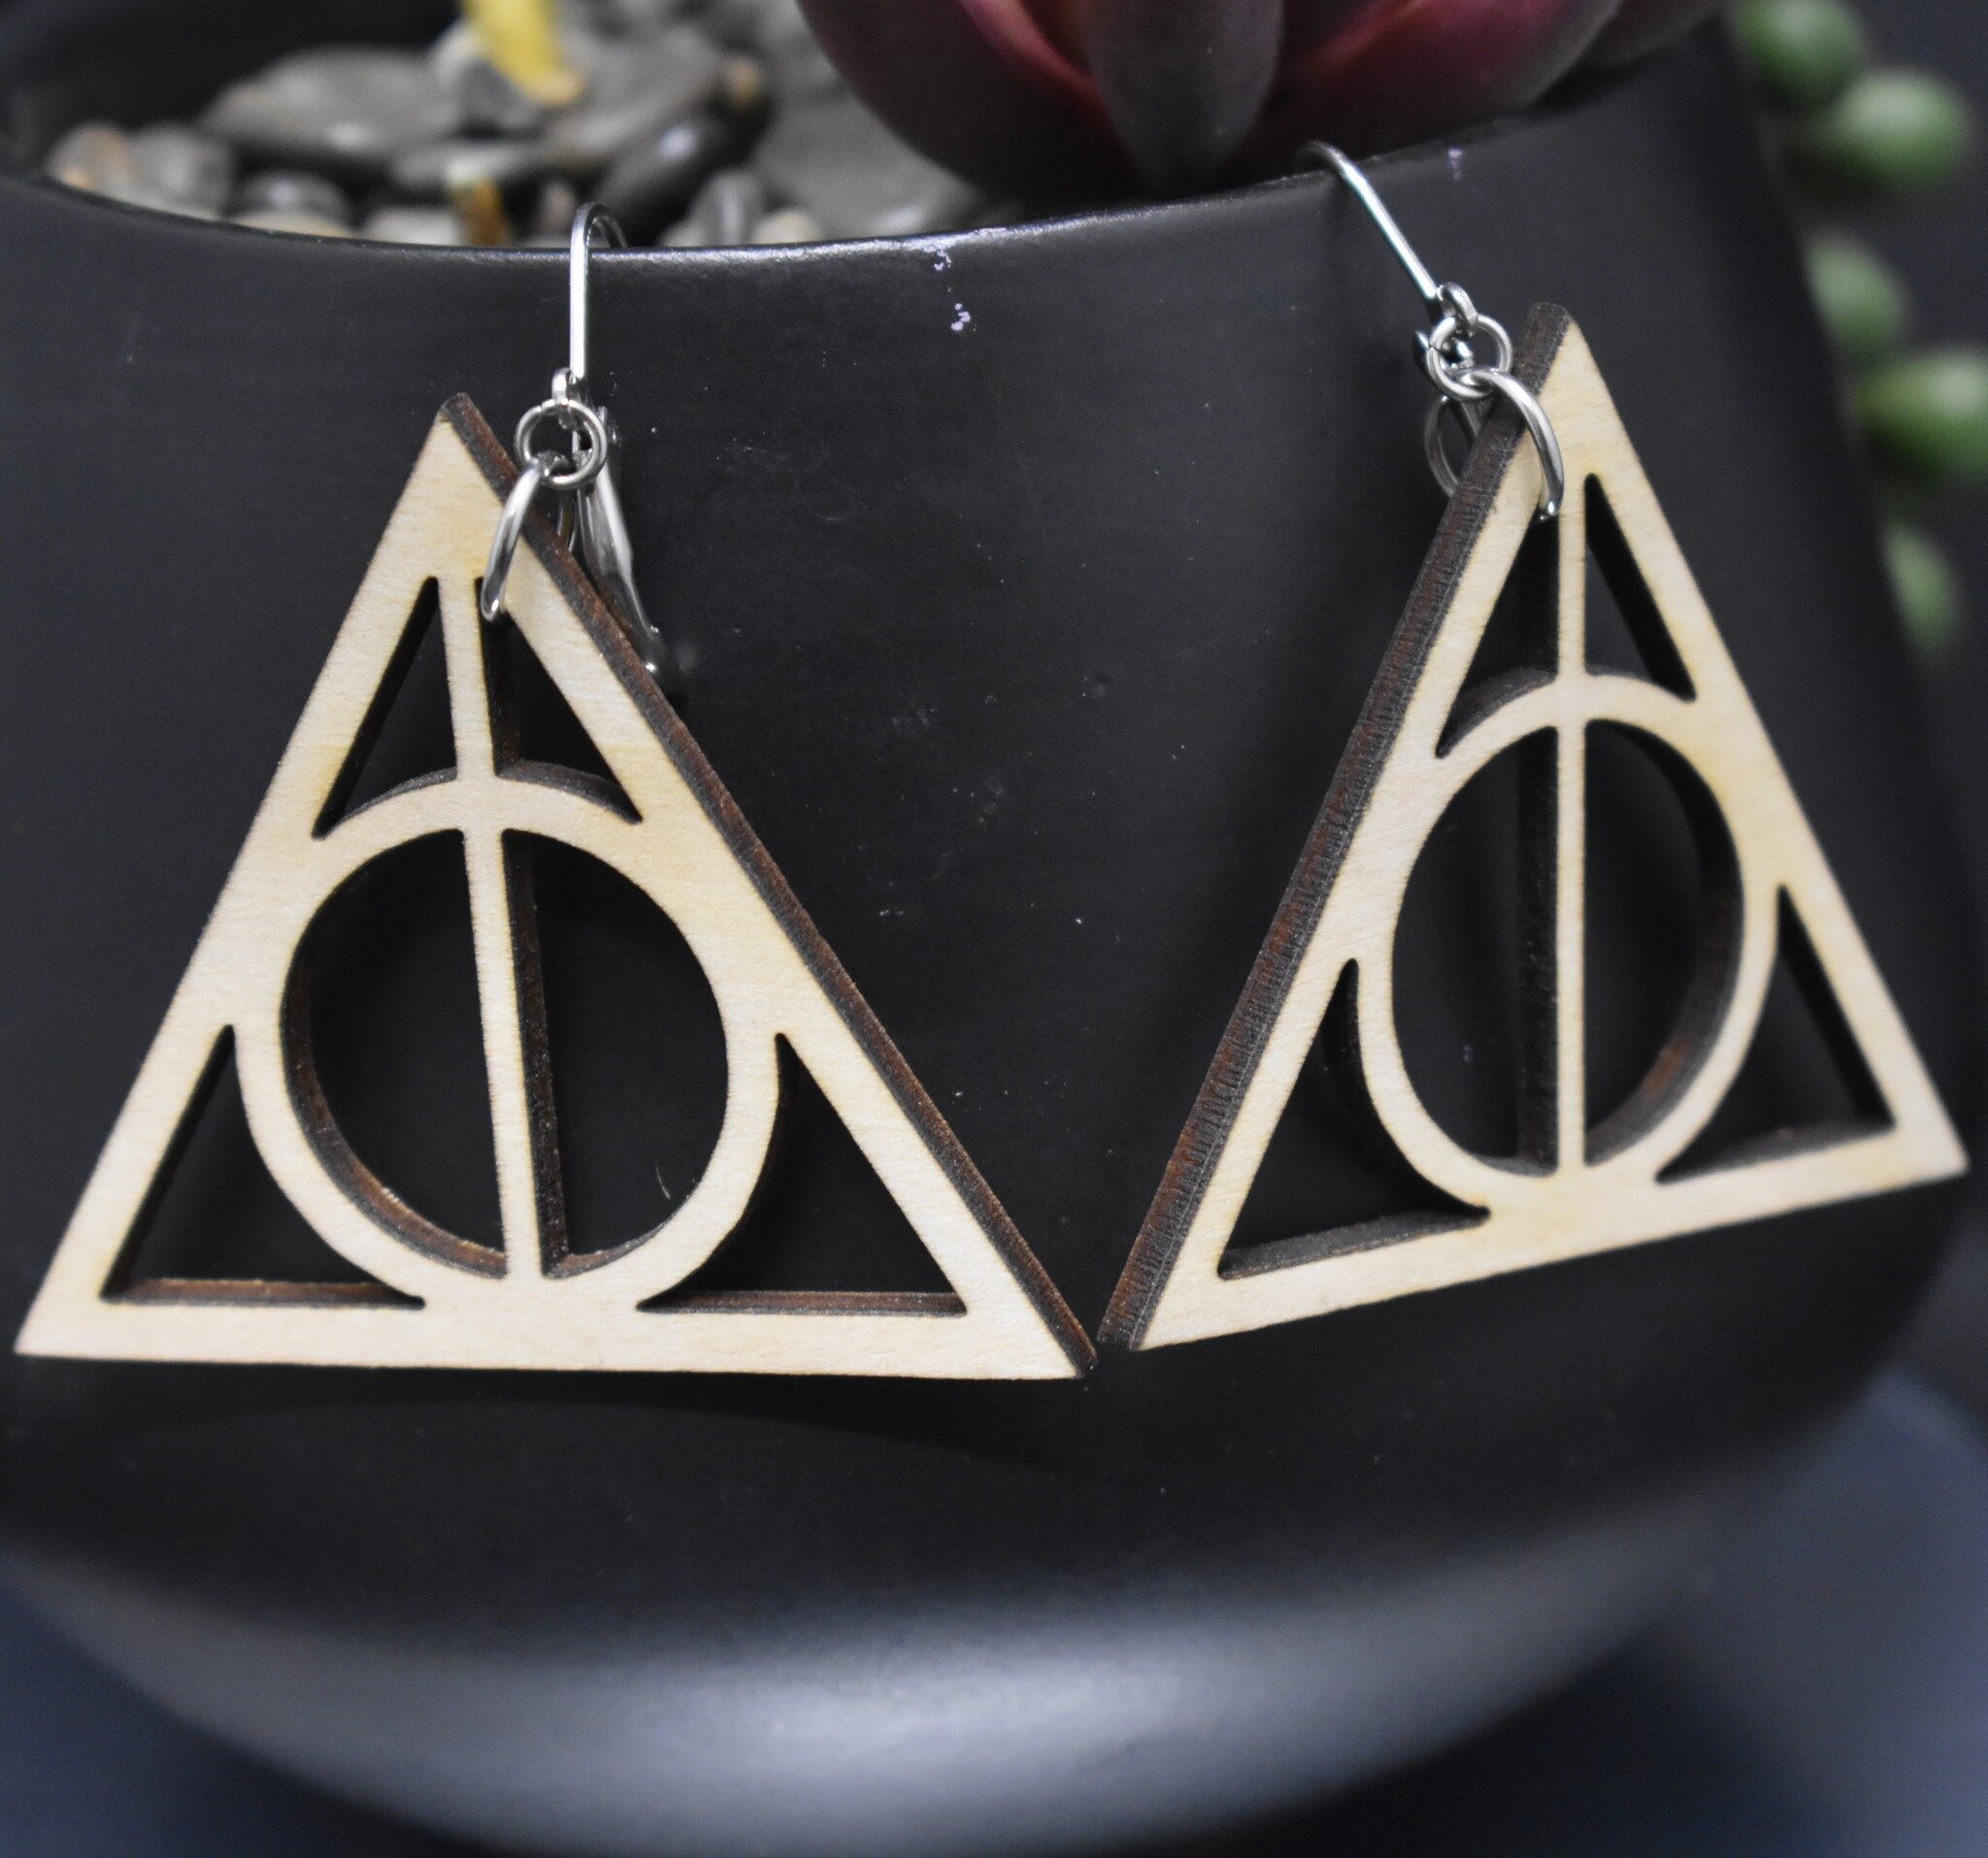 I have 3 of these Deathly Hallows earrings available and ready to ship. They are great for the Harry Potter fan in your life.
 #deathlyhallowssymbol #deathlyhallowsearring #harrypotterjewelry #harrypotterearrings #thethreebrothers #harrypotterfandom 